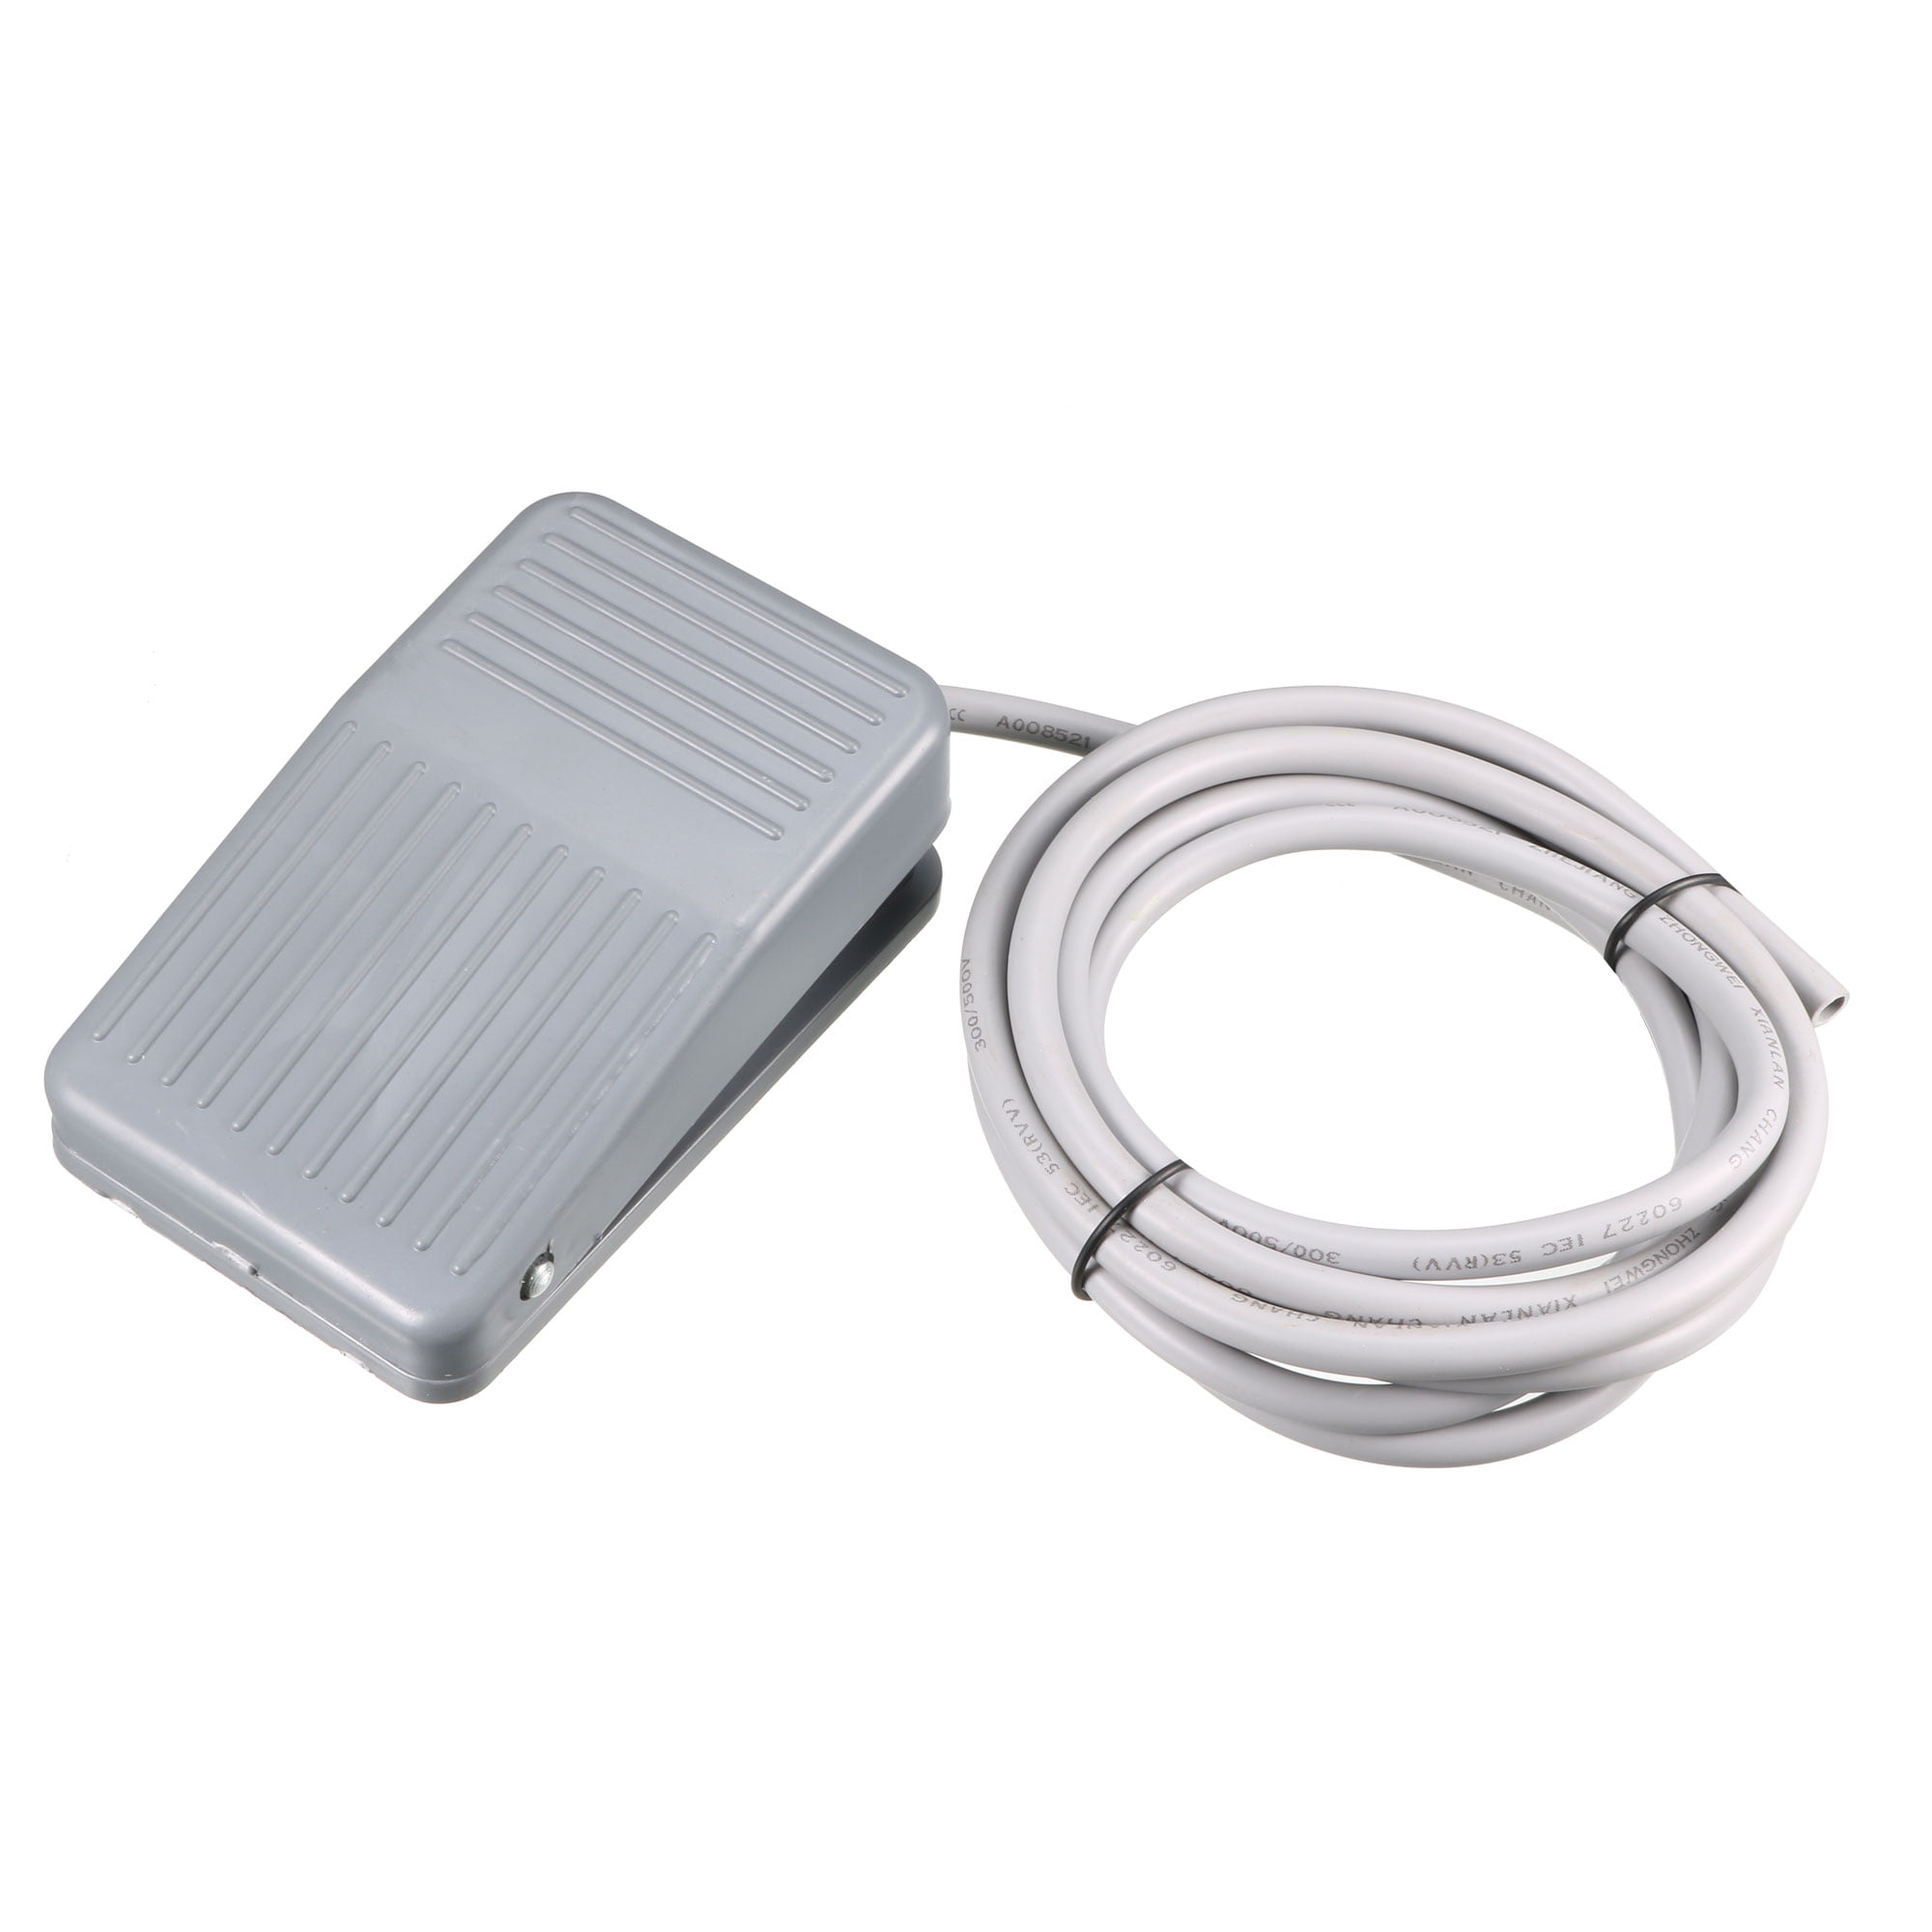 Momentary Power Foot Pedal Switch Plastic Industrial 2M Cable 